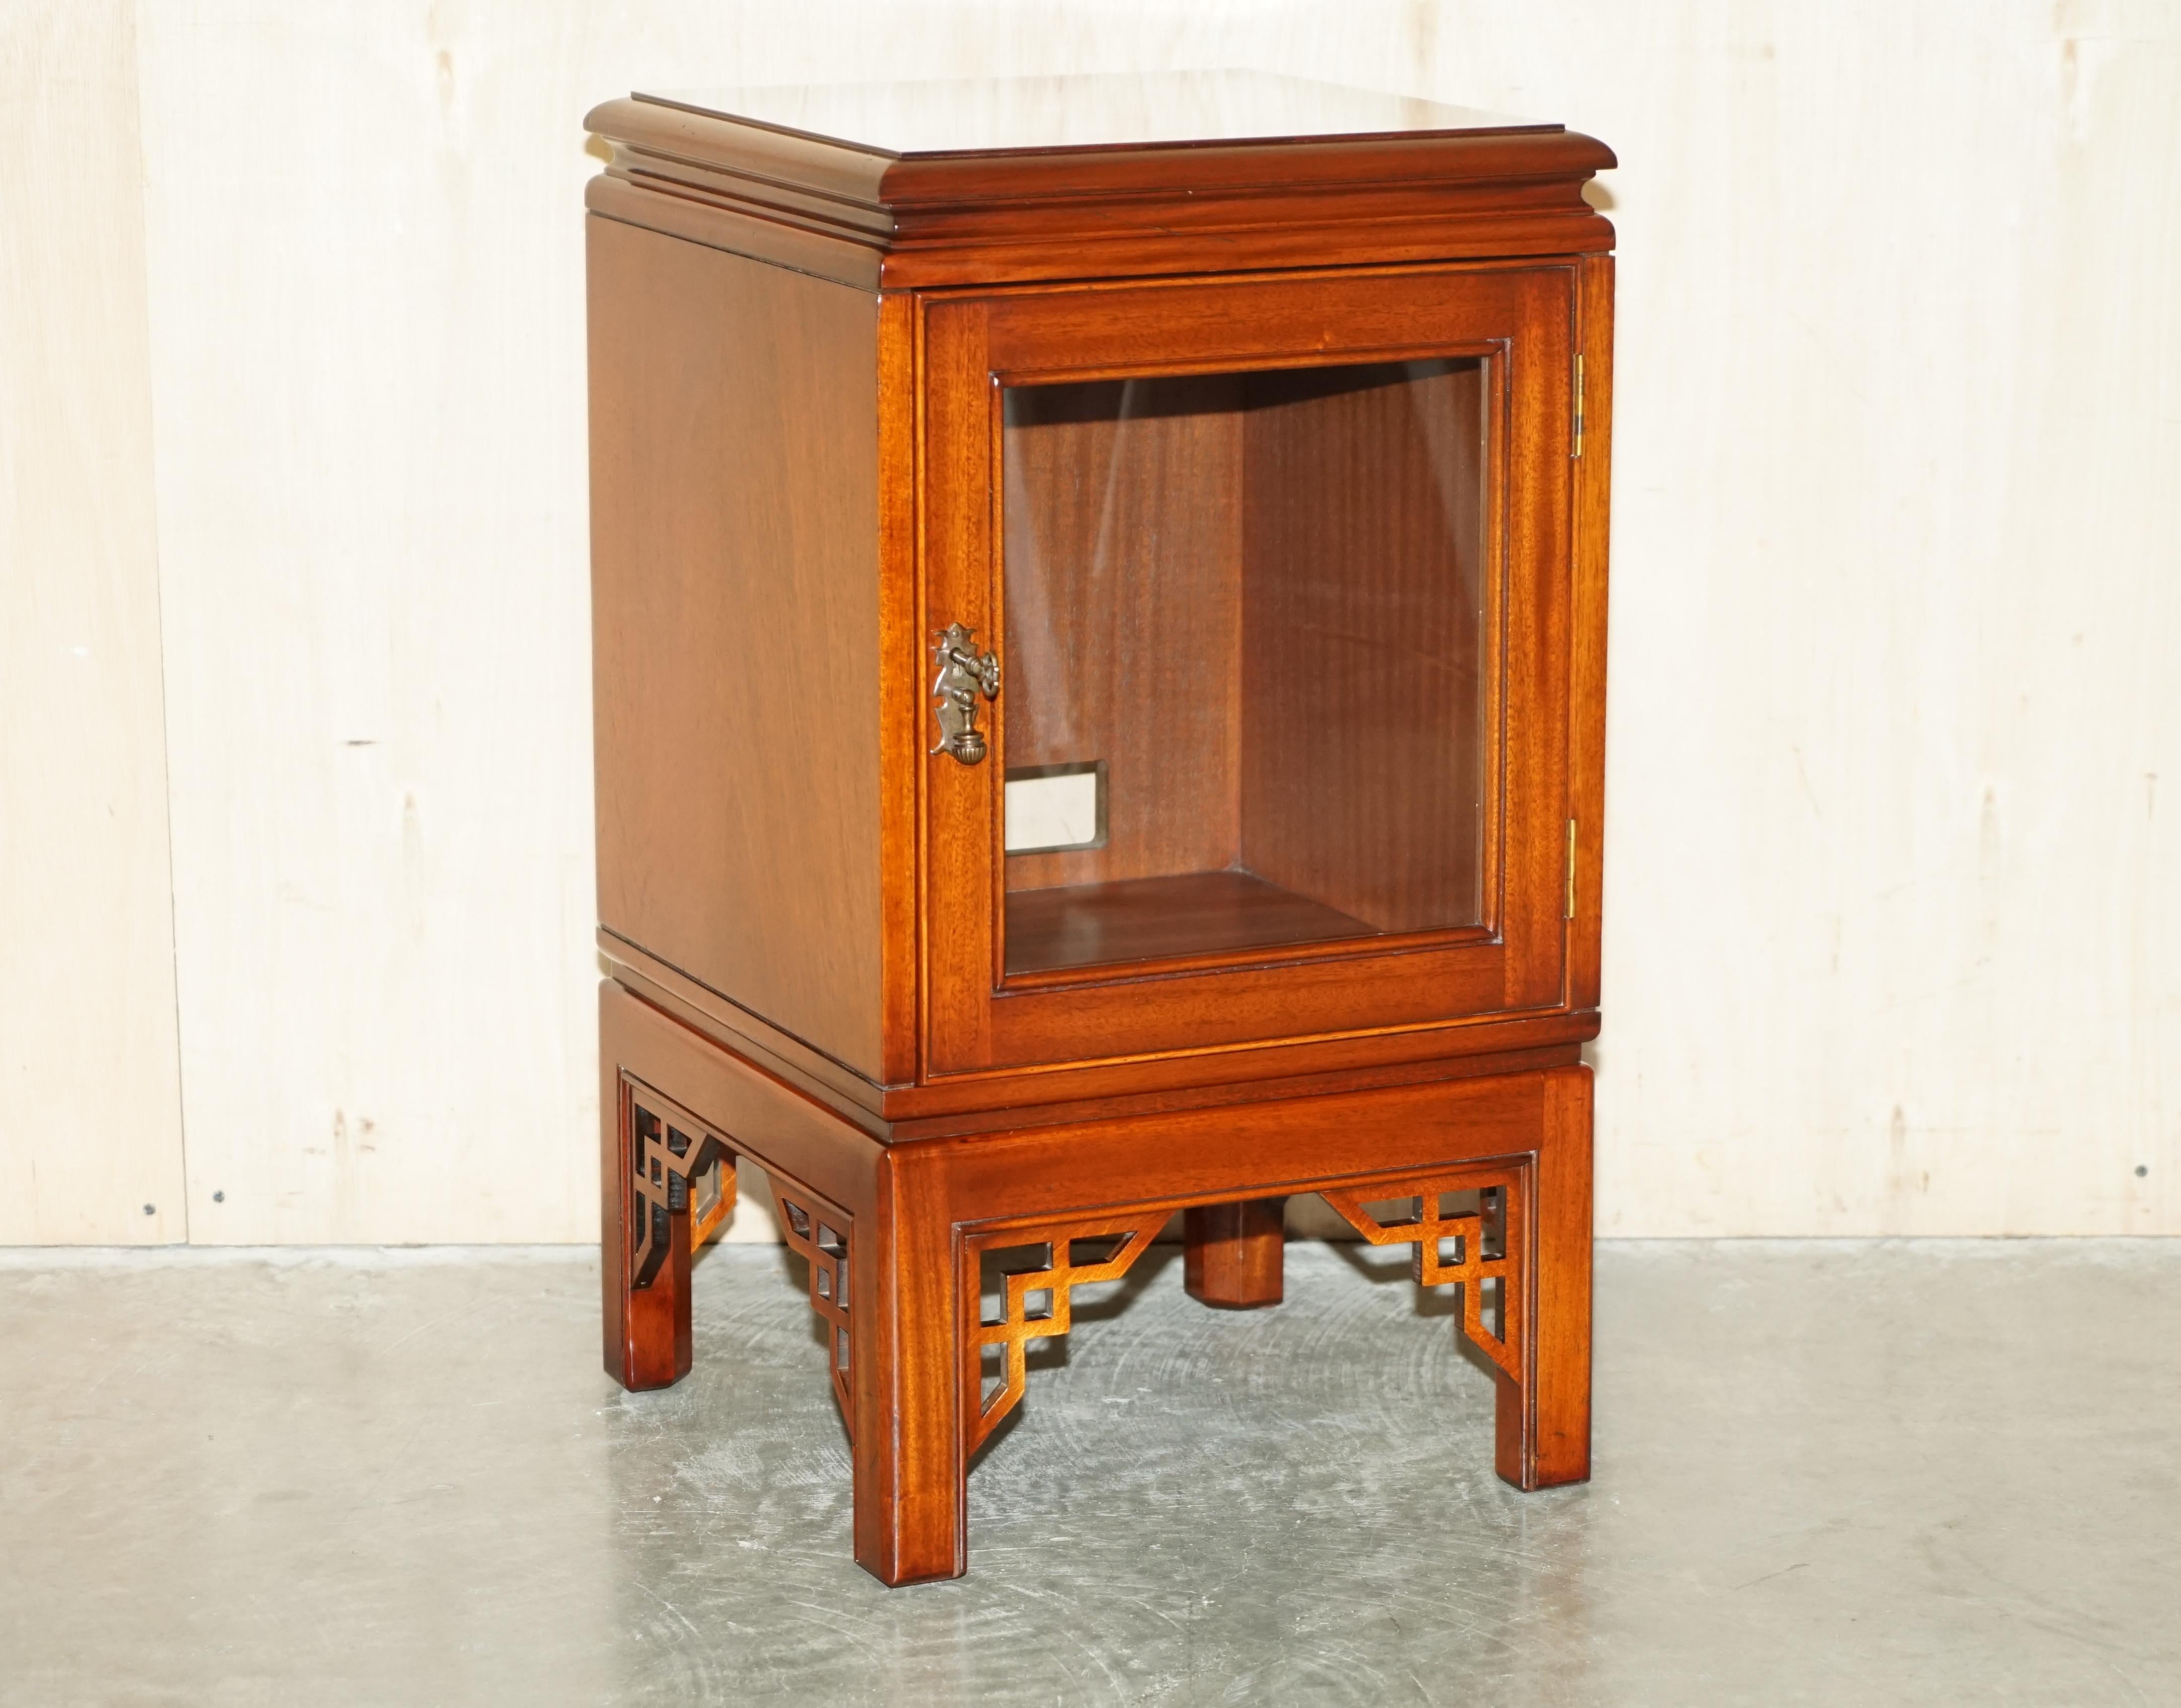 Royal House Antiques

Royal House Antiques is delighted to offer for sale this lovely Oriental style side table cabinet designed for media box / games console storage 

Please note the delivery fee listed is just a guide, it covers within the M25